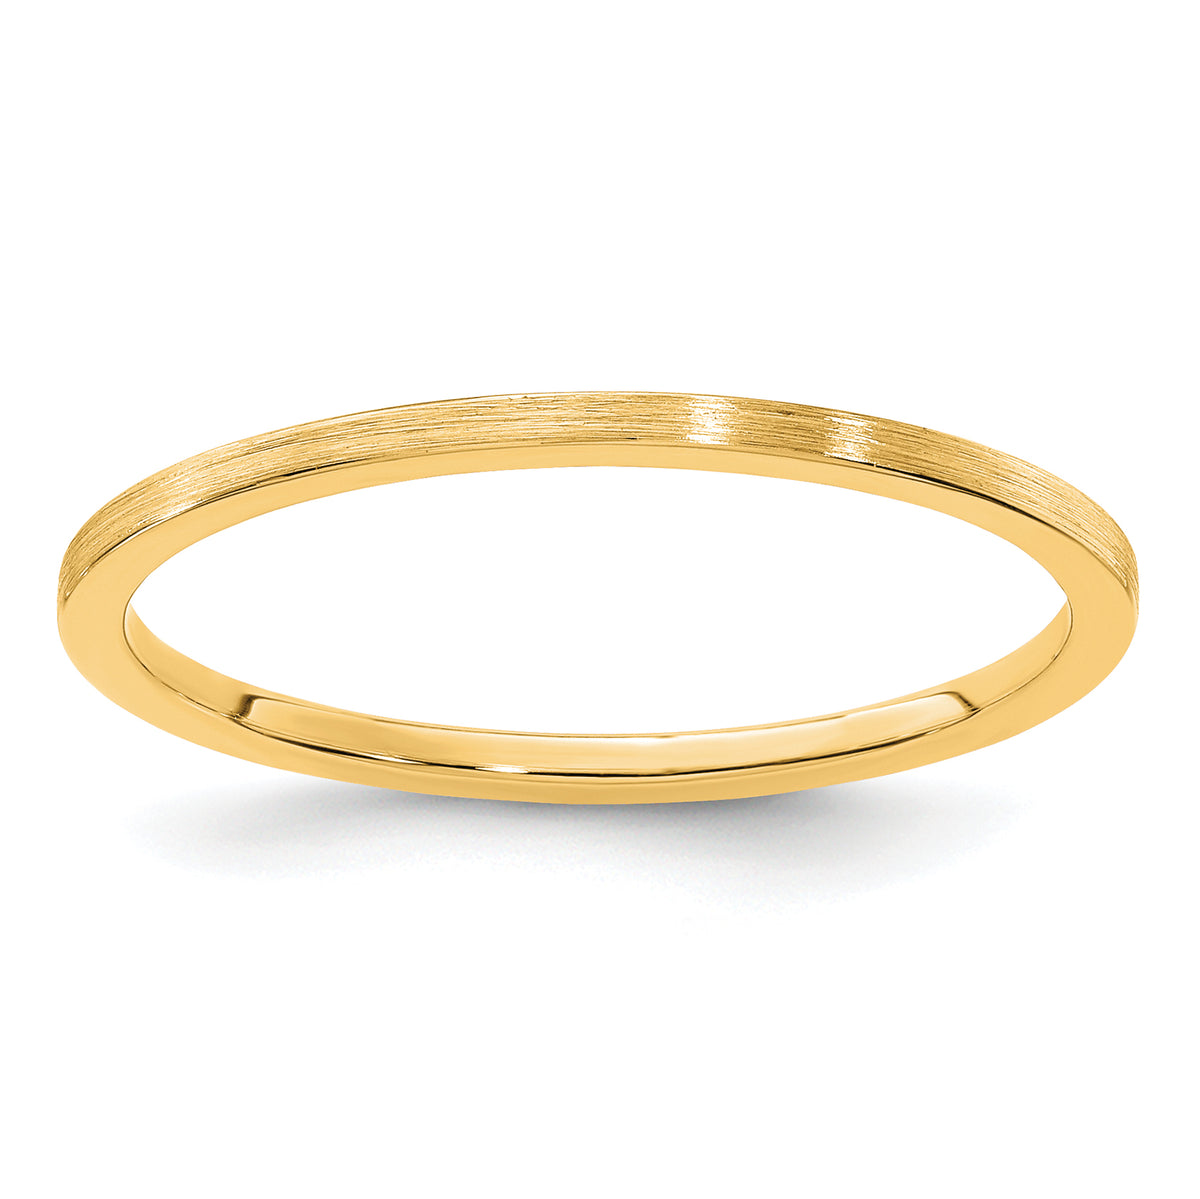 14K Yellow Gold 1.2mm Flat Satin Stackable Band Size 10